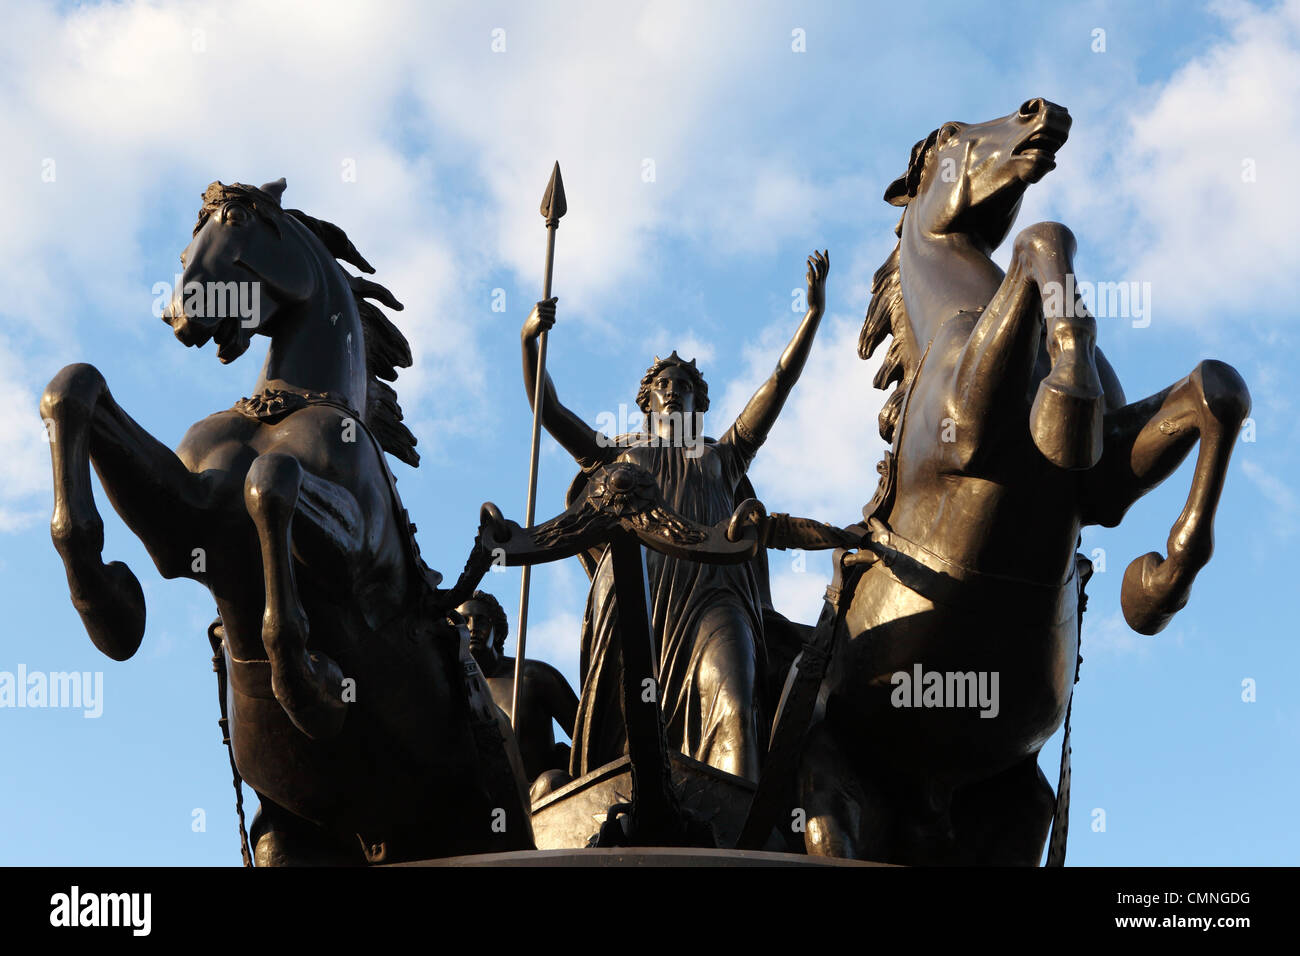 Boadicea (Boudicca) monument at the Thames Embankment in London, England. Stock Photo